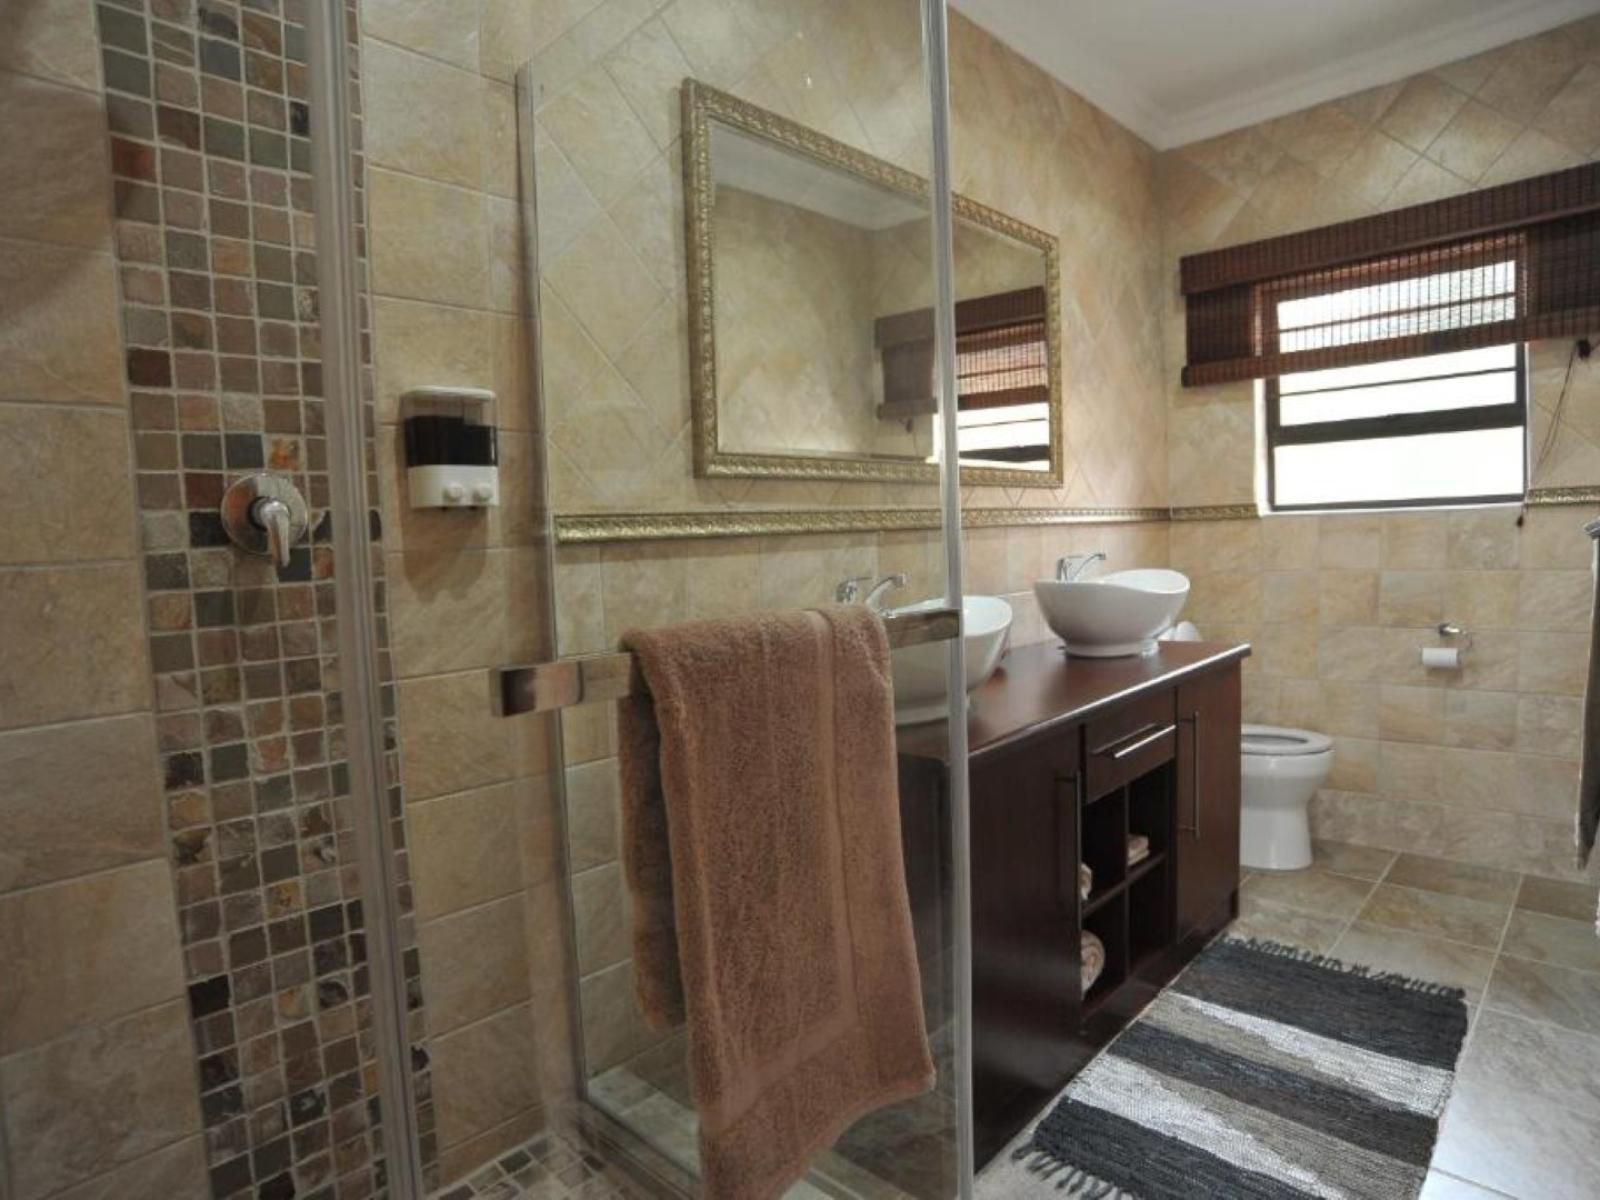 Sunset Manor Guest House Potchefstroom North West Province South Africa Bathroom